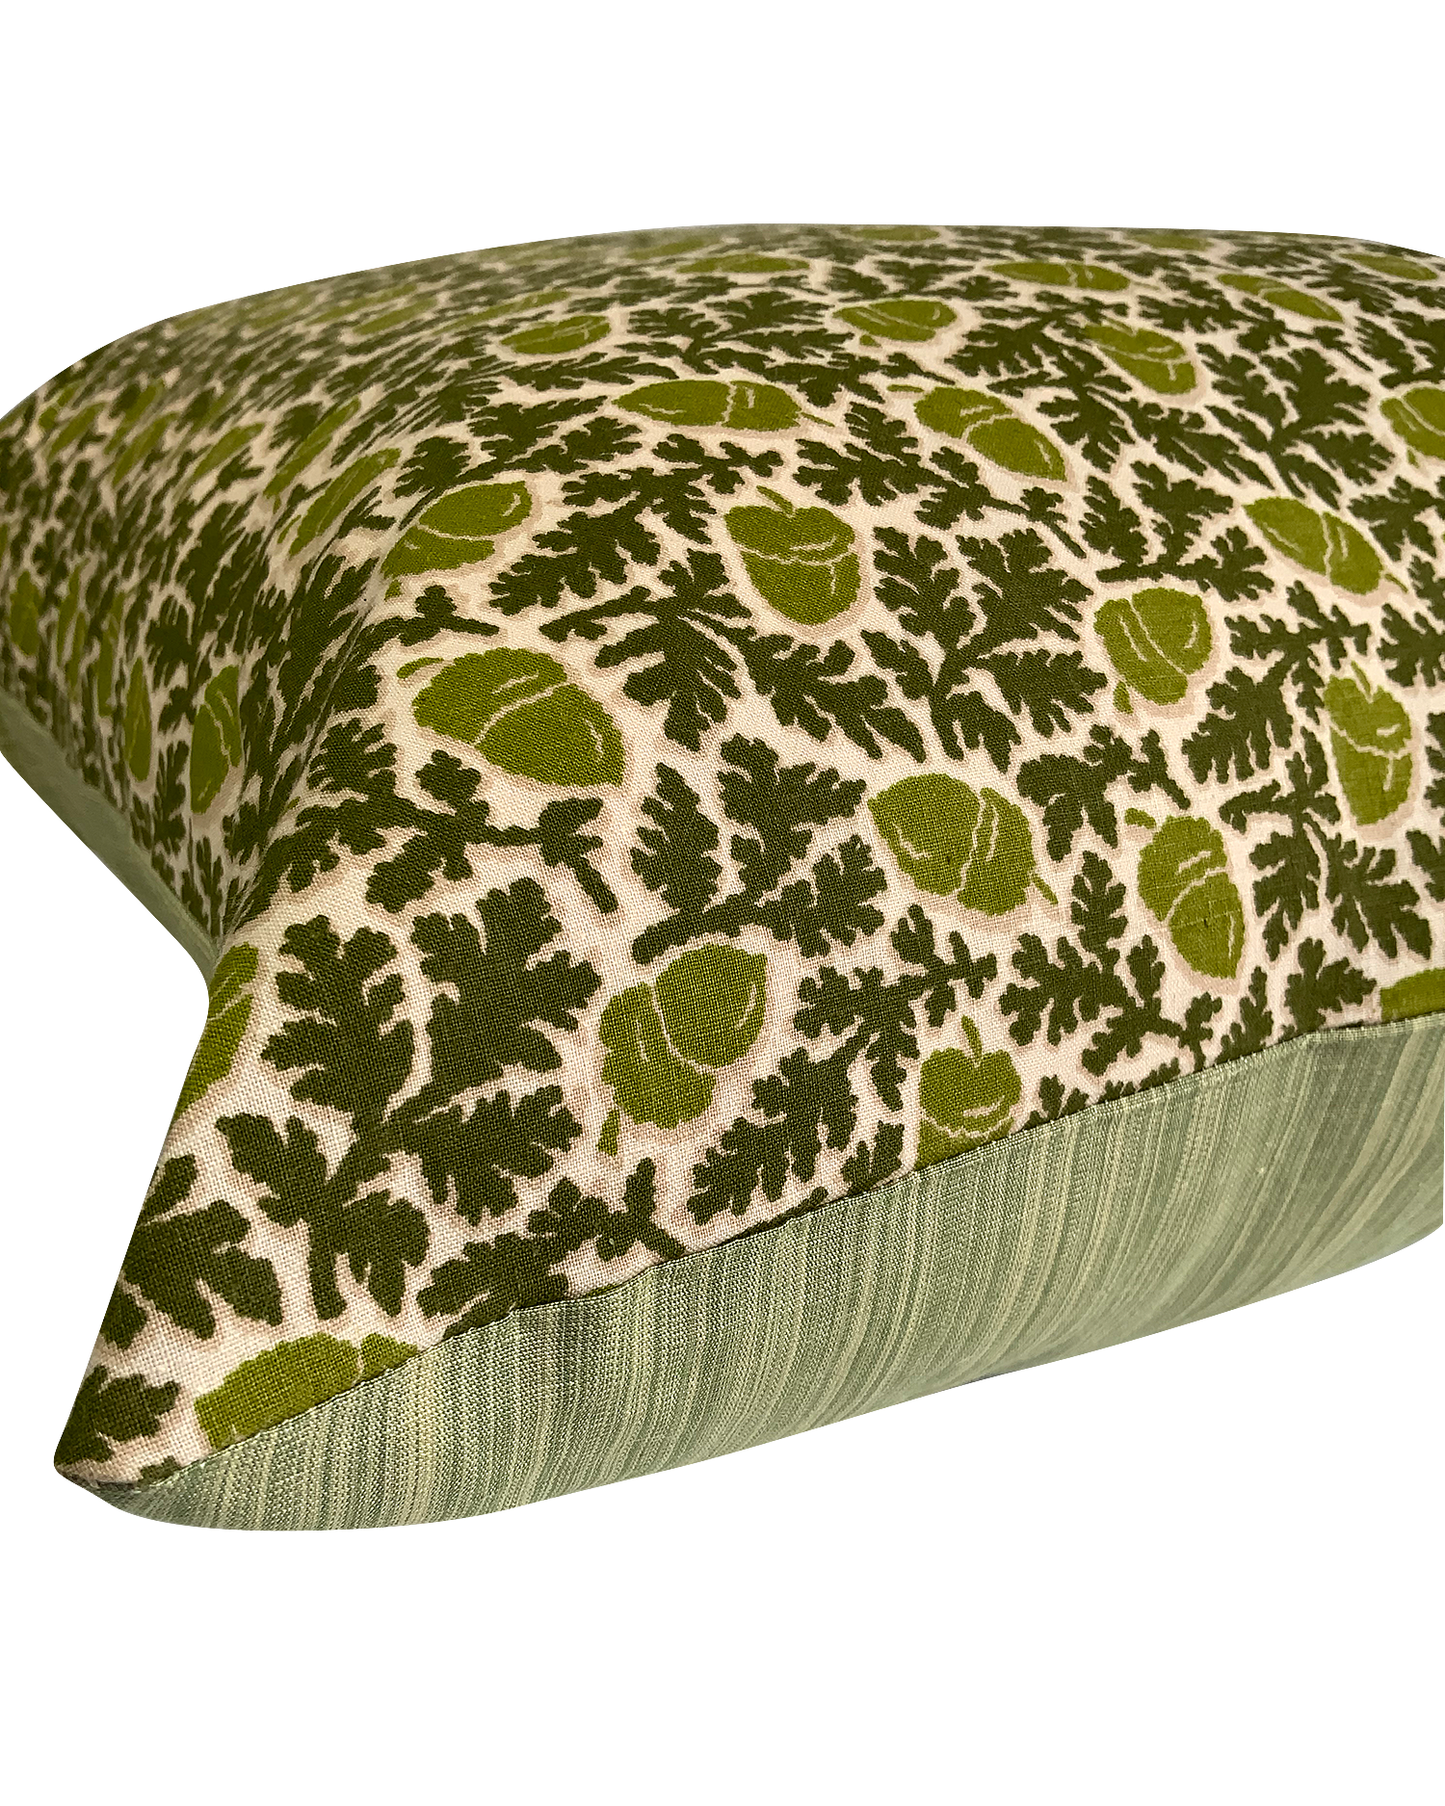 Cushion Cover in “Acorn” Print  in green/chartreuse